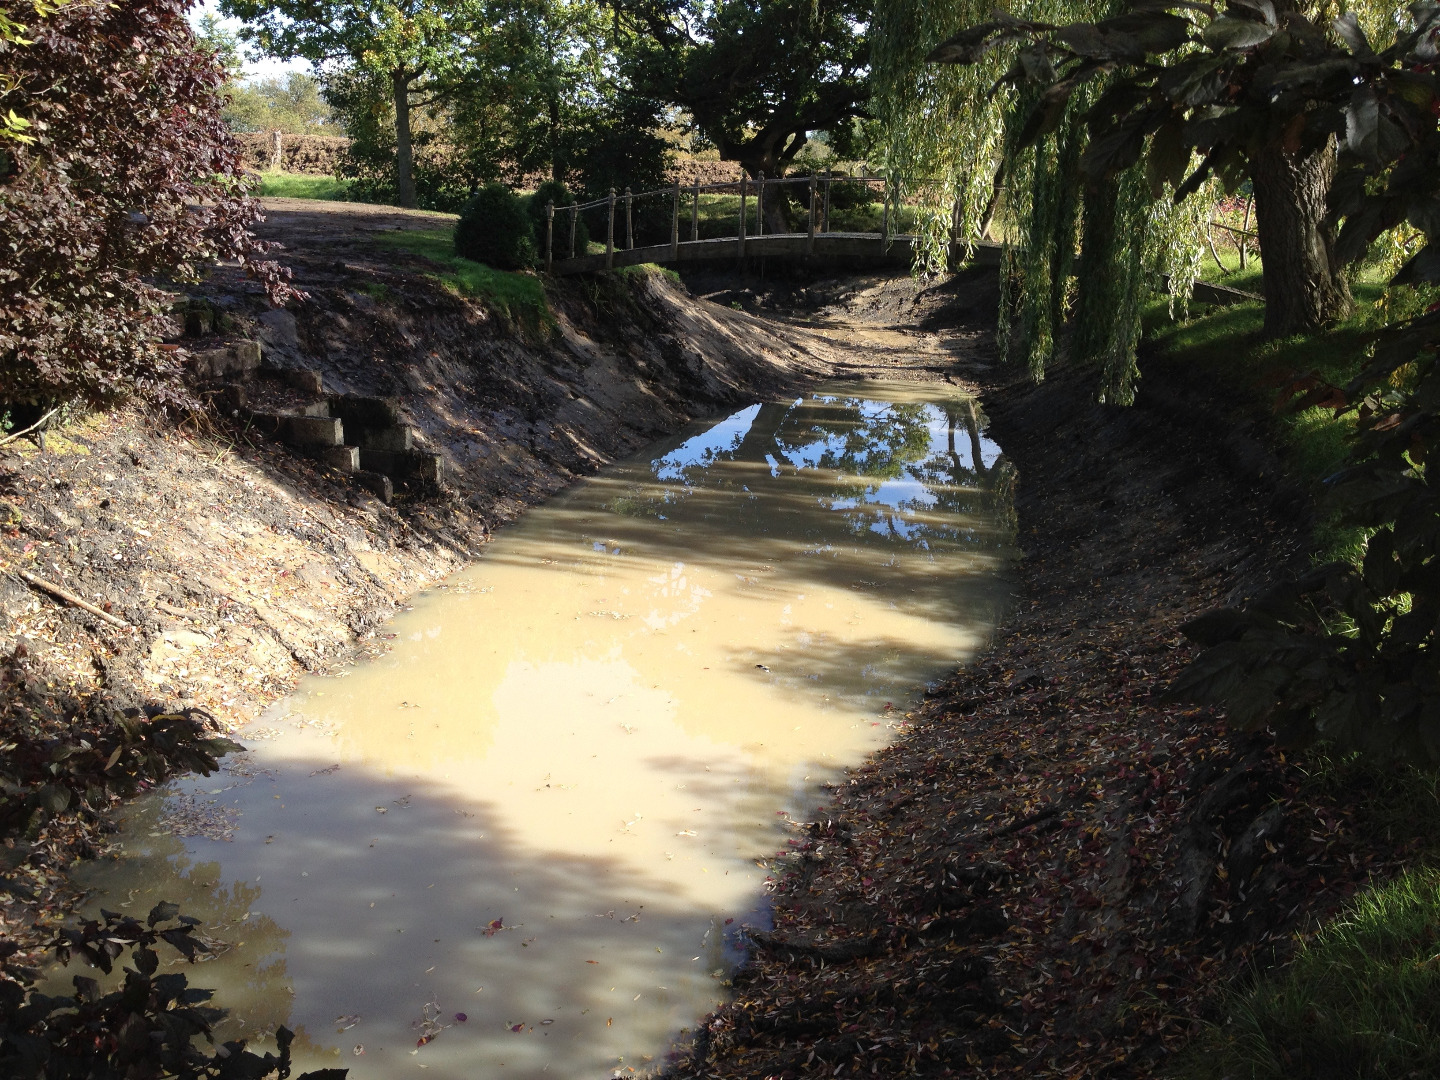 Moat restoration and silt removed in Wiltshire